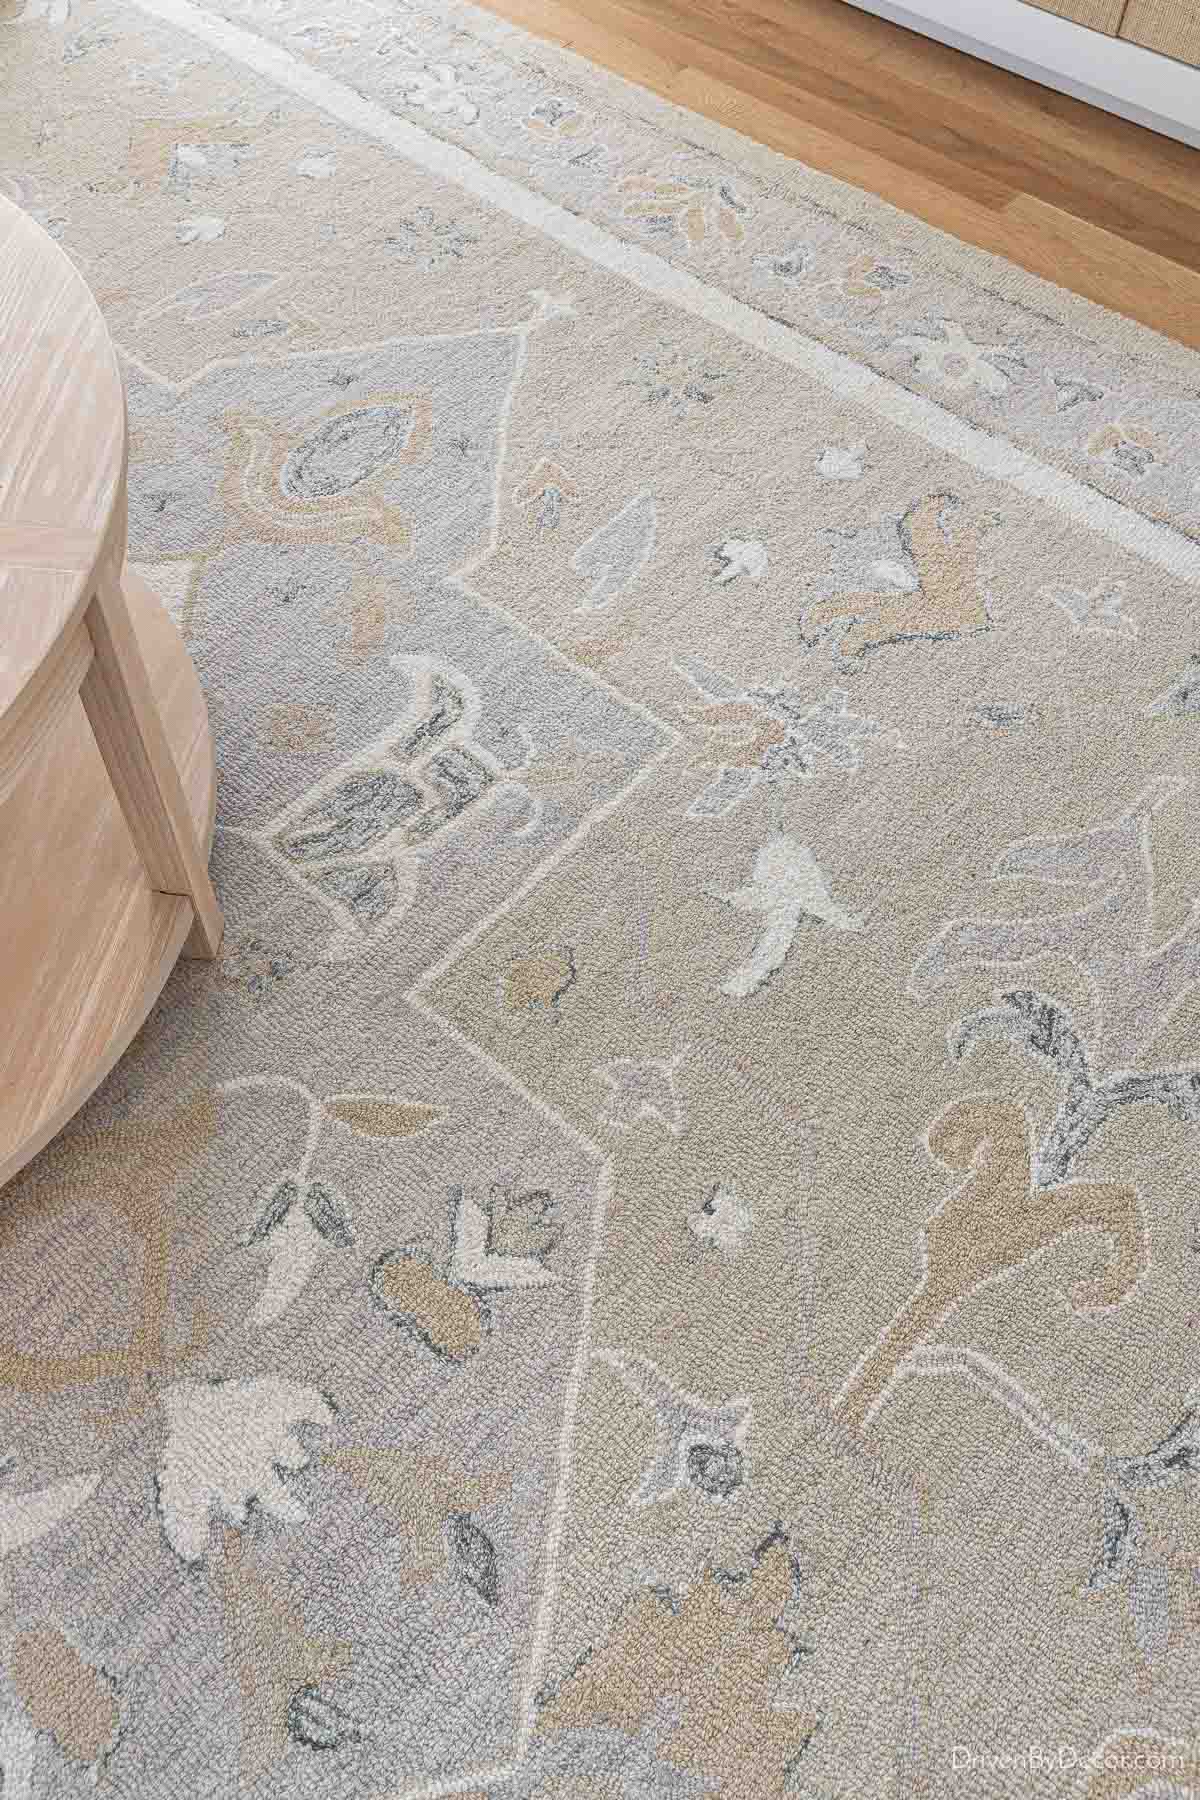 Plush patterned neutral area rug